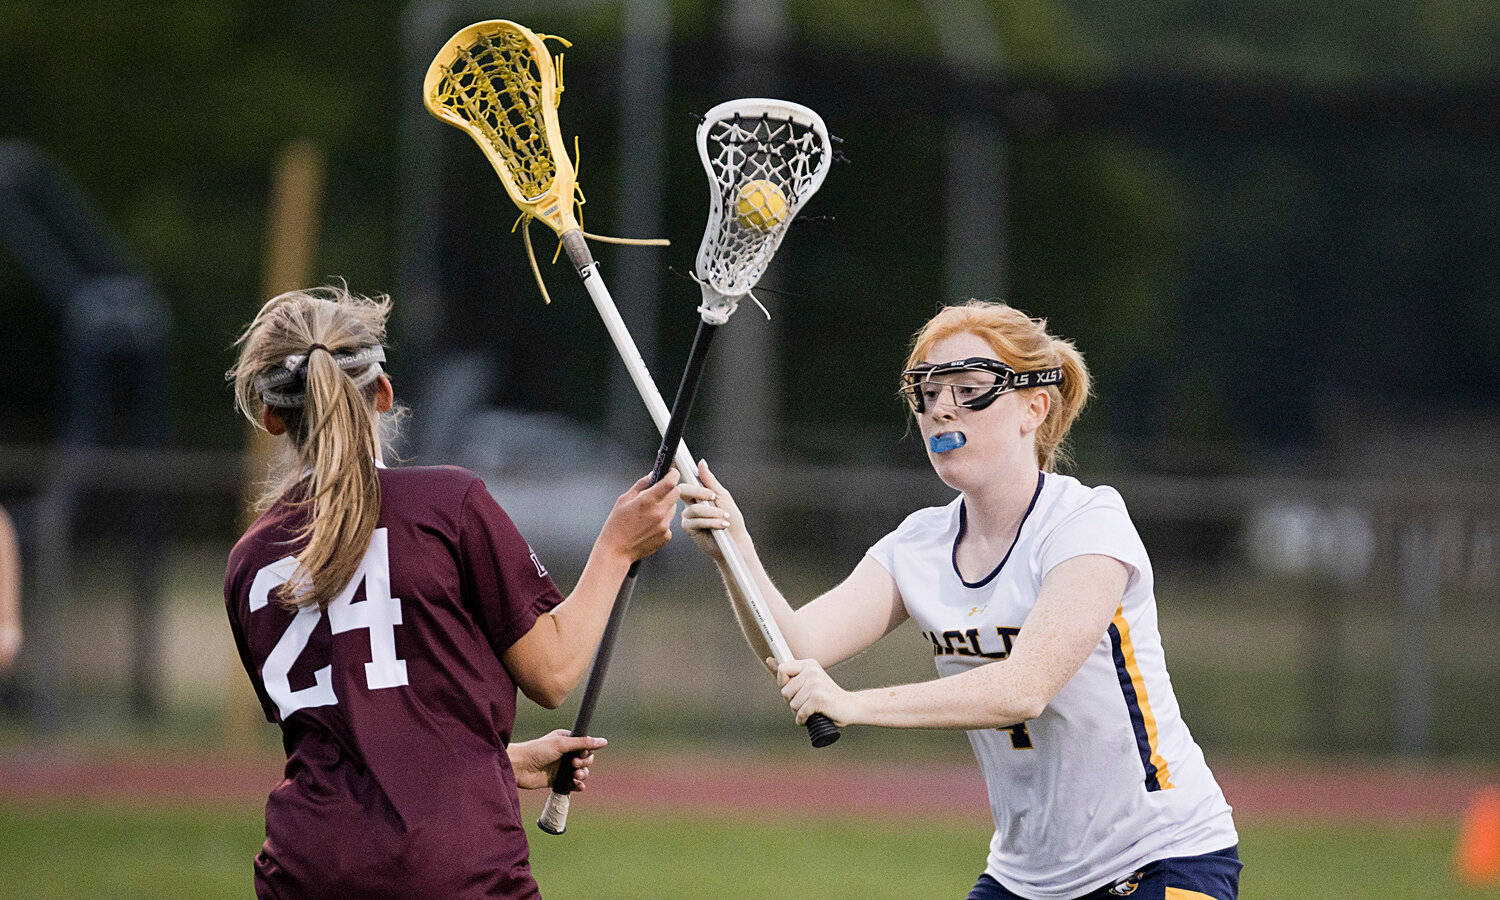 Barrington's Winnie Macaulay (right) forces a LaSalle opponent to pass while playing defense for the Eagles.